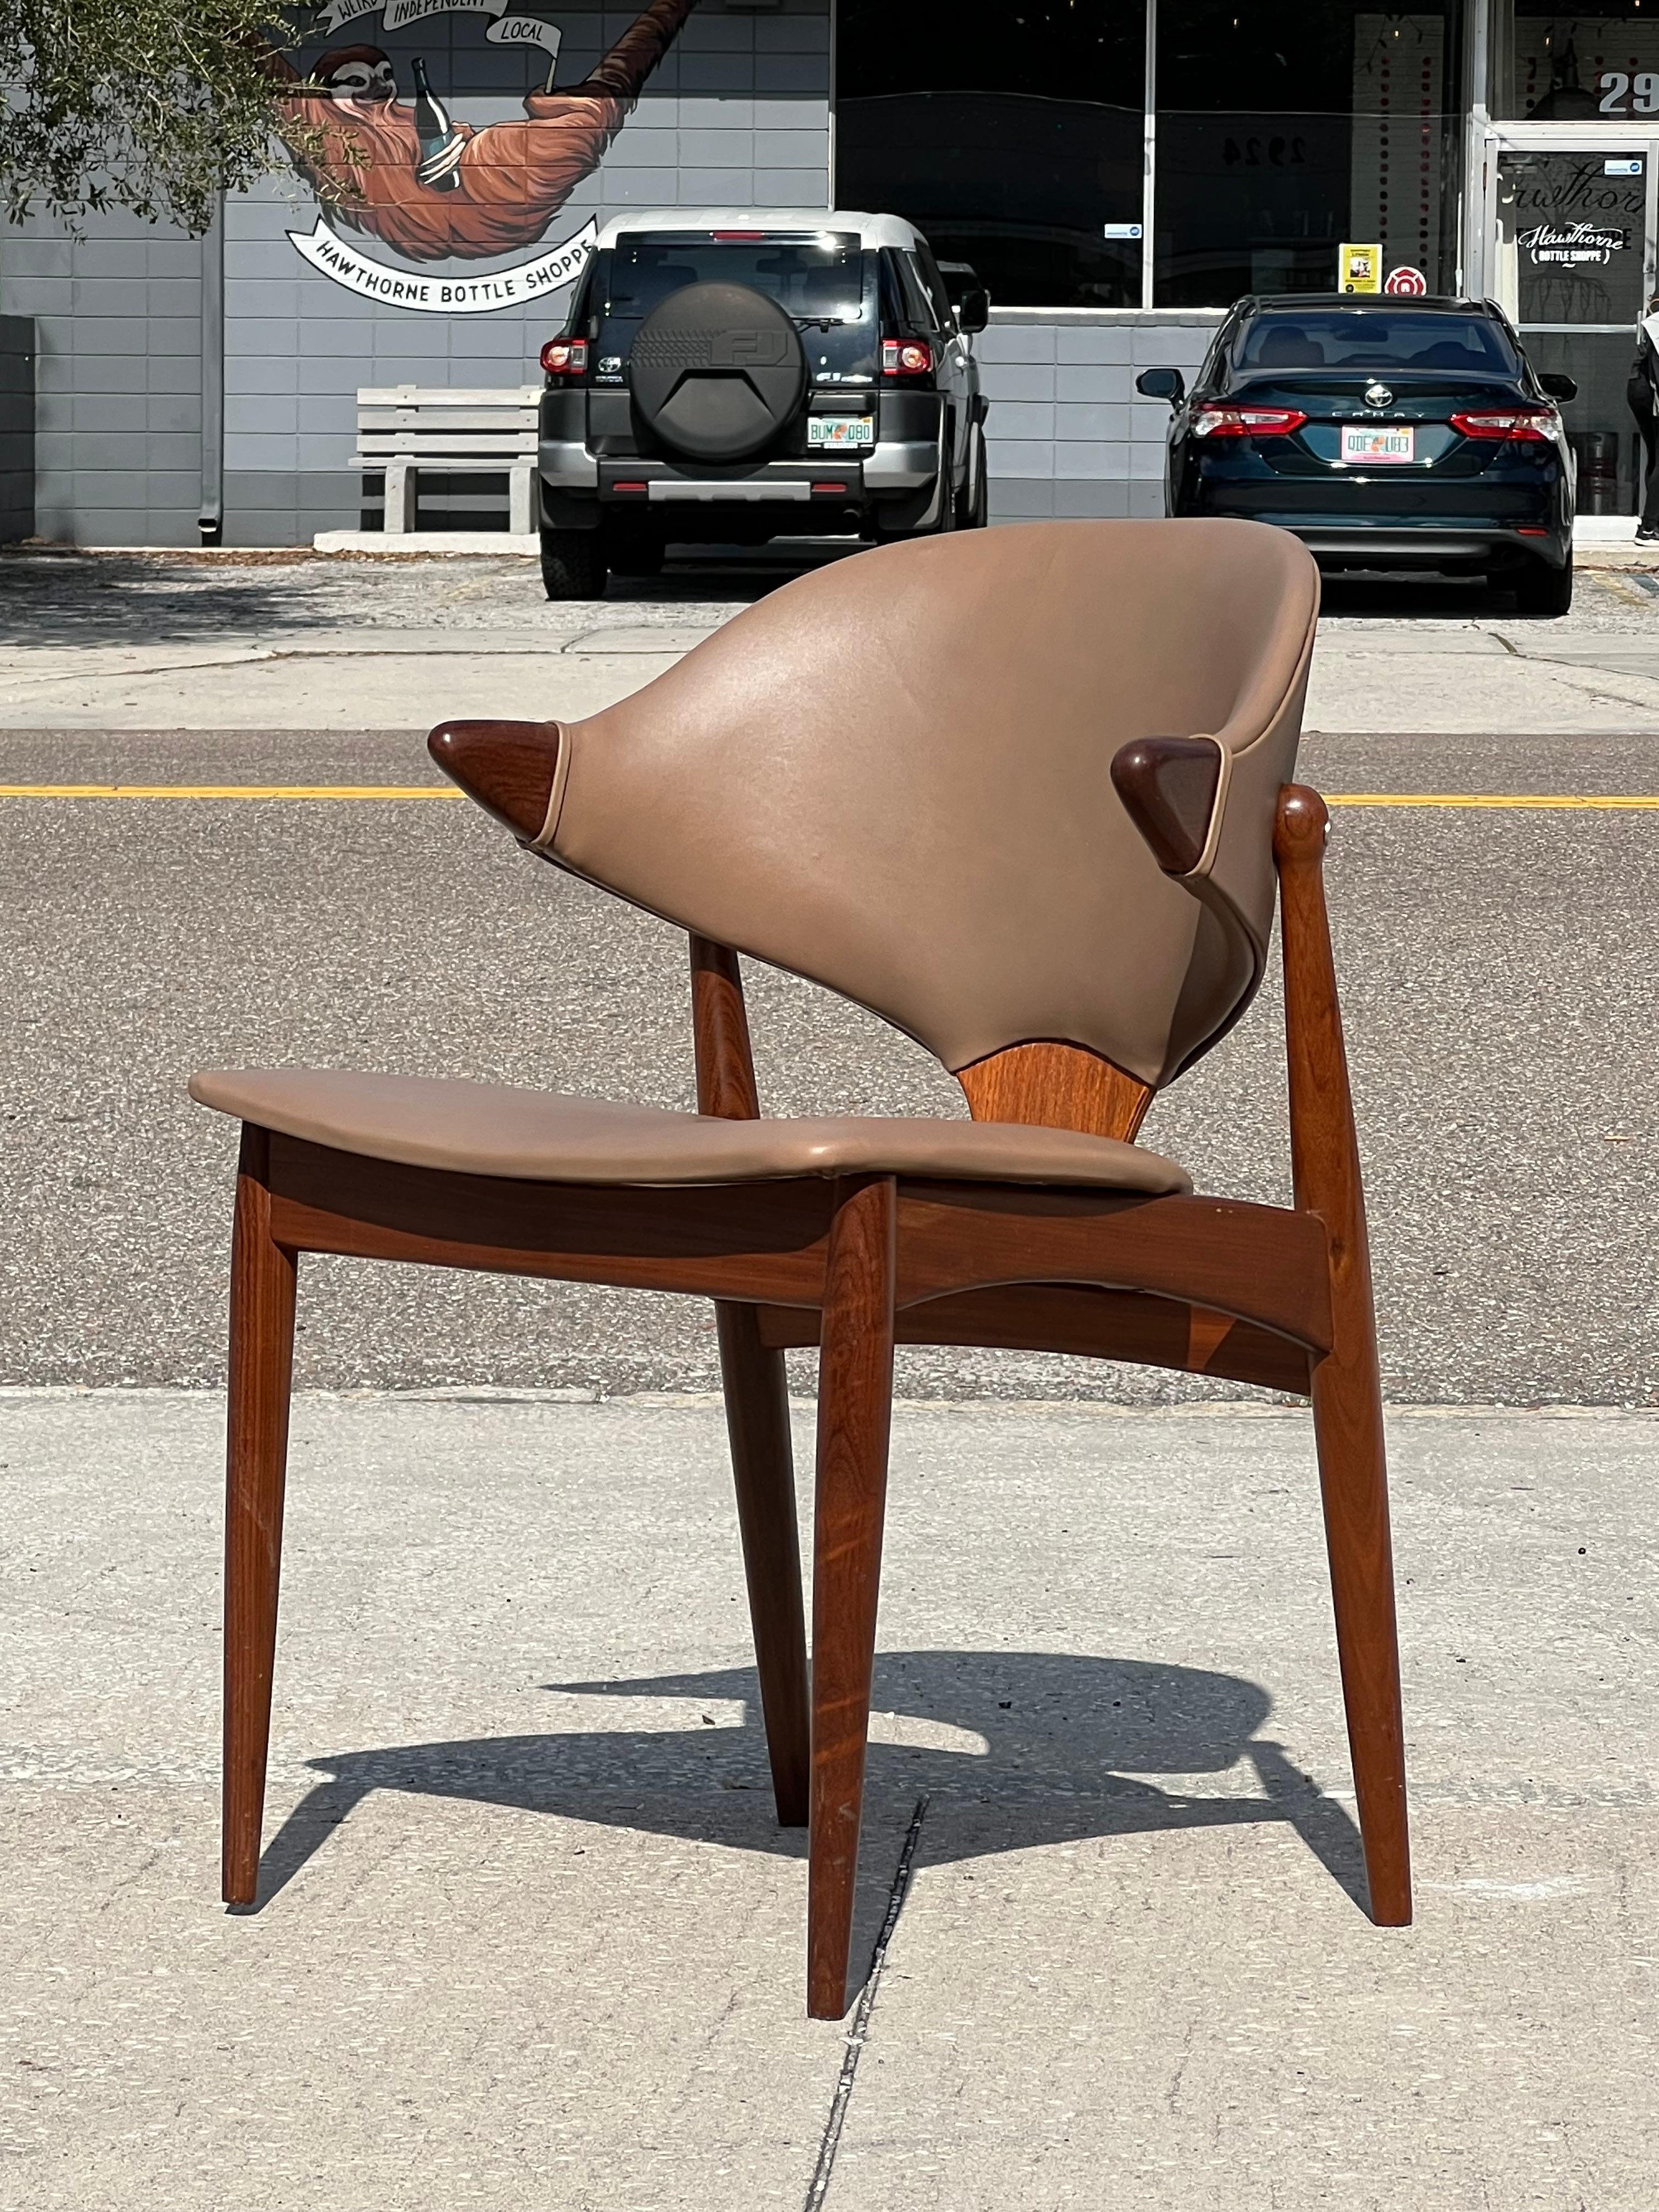 Classic Arne Vodder Leather And Teak Chair For Mahjongg Holland 1964 For Sale 5